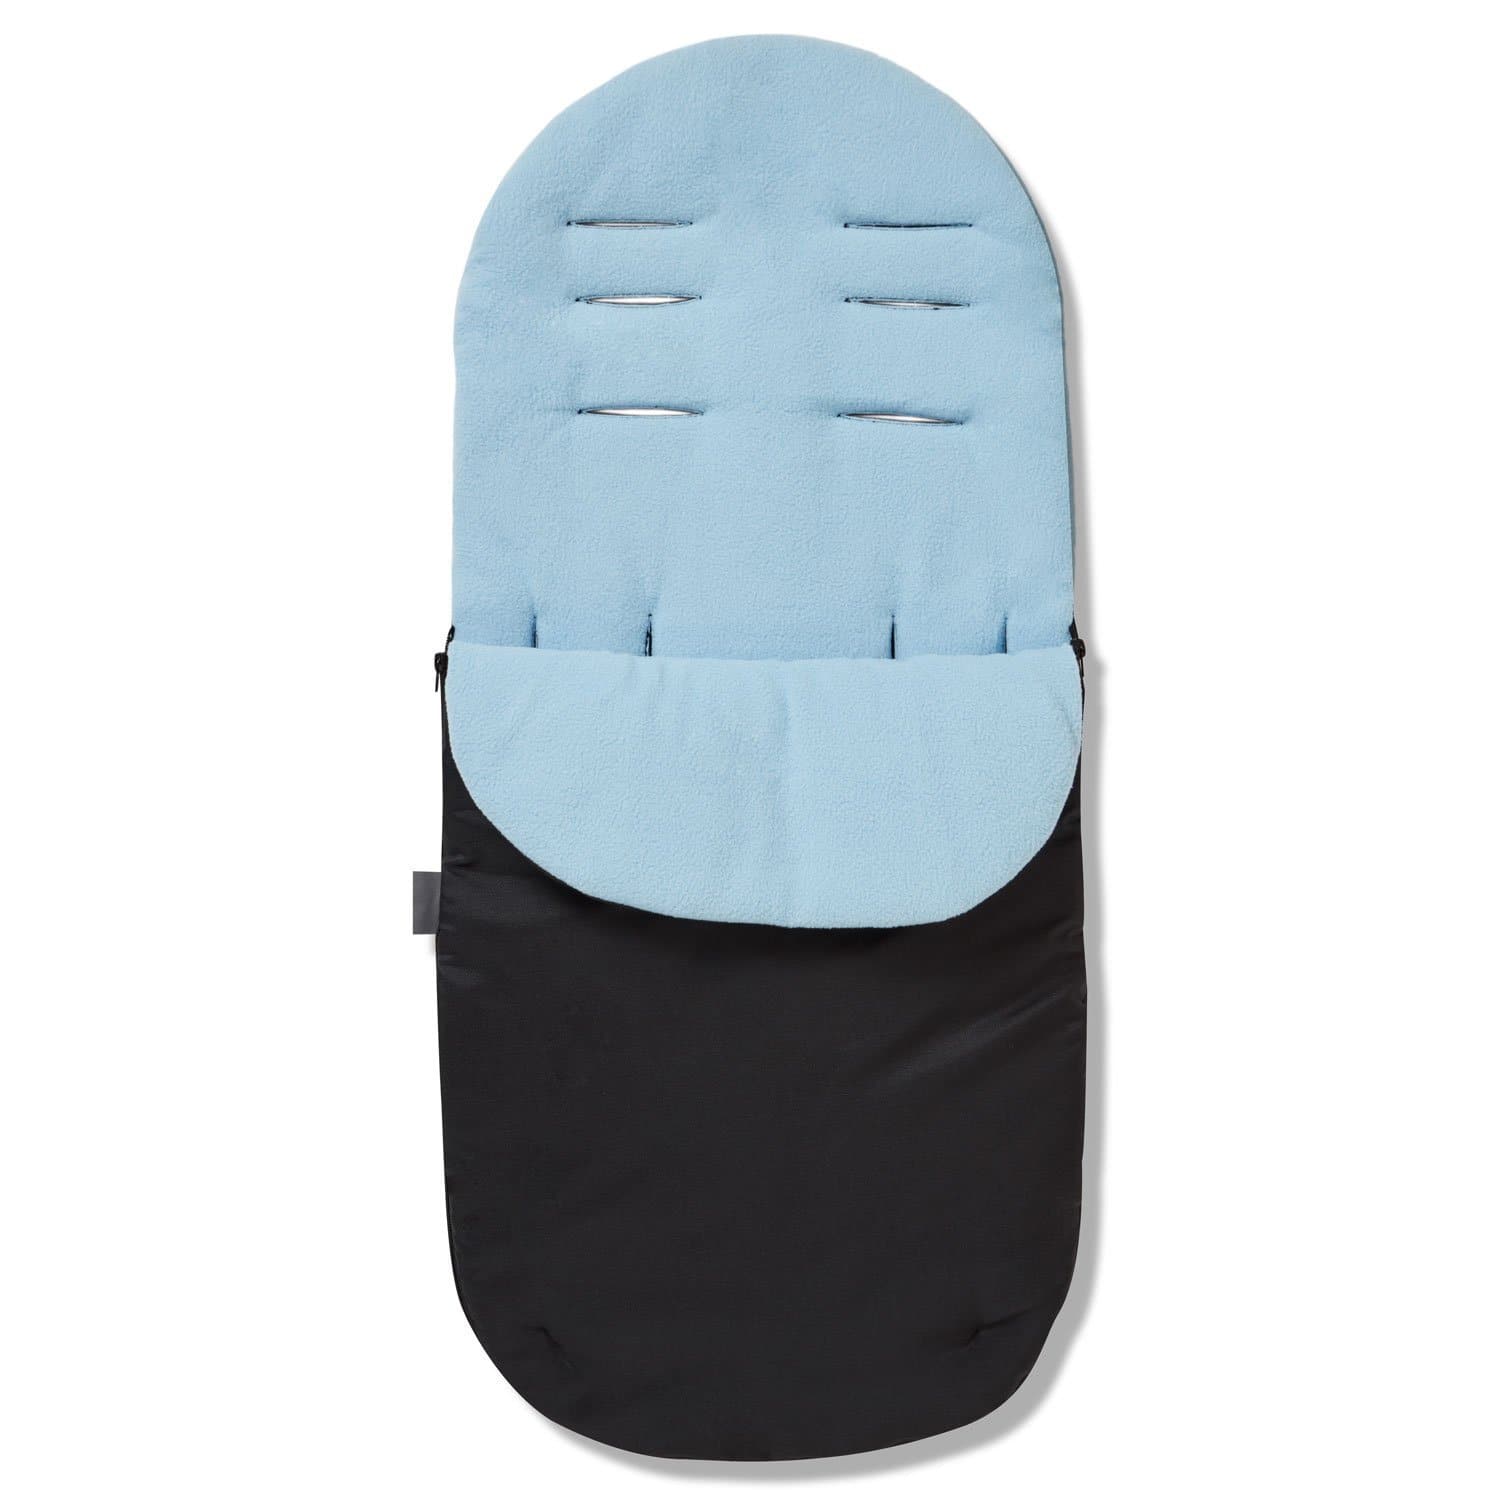 Footmuff / Cosy Toes Compatible with Mima - Light Blue / Fits All Models | For Your Little One